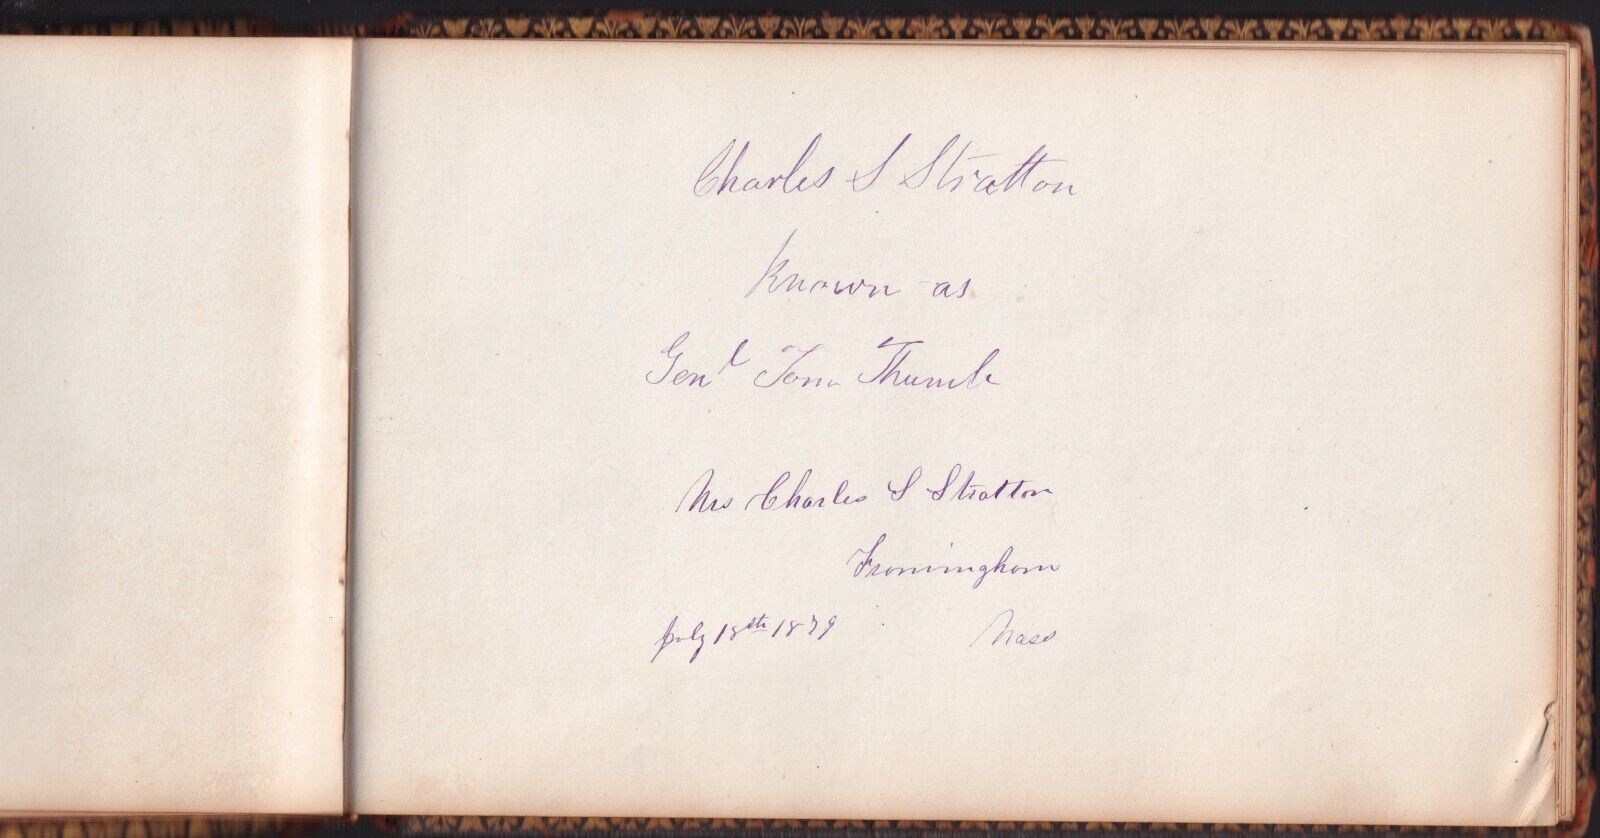 General Tom Thumb Charles Stratton & wife SIGNED album page JSA LOA + PT Barnum